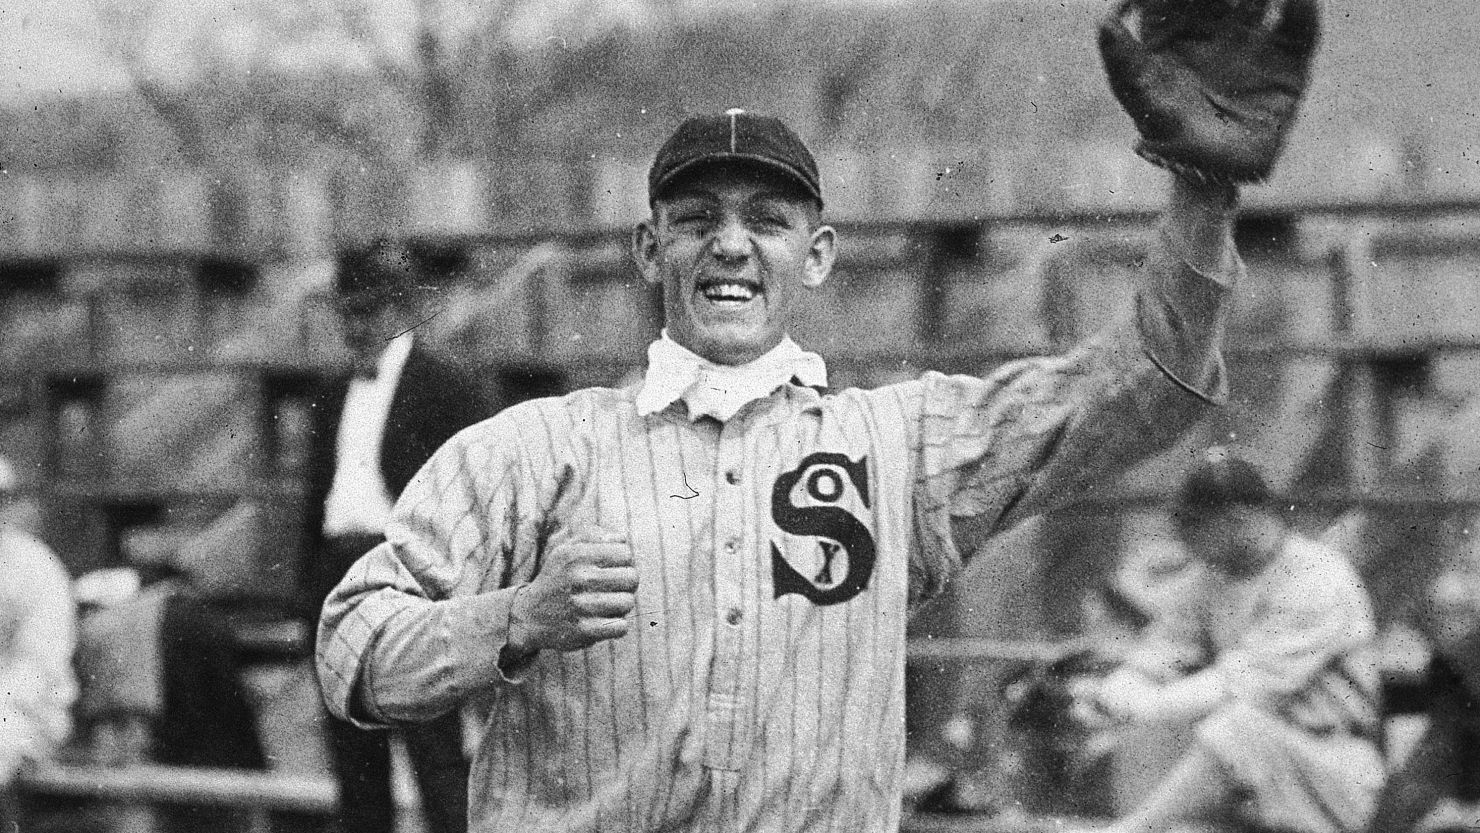 Chicago White Sox third baseman Buck Weaver was among the players banned for life from baseball for knowing about but not reporting the fixing of the 1919 World Series, although he did not participate or take money. 